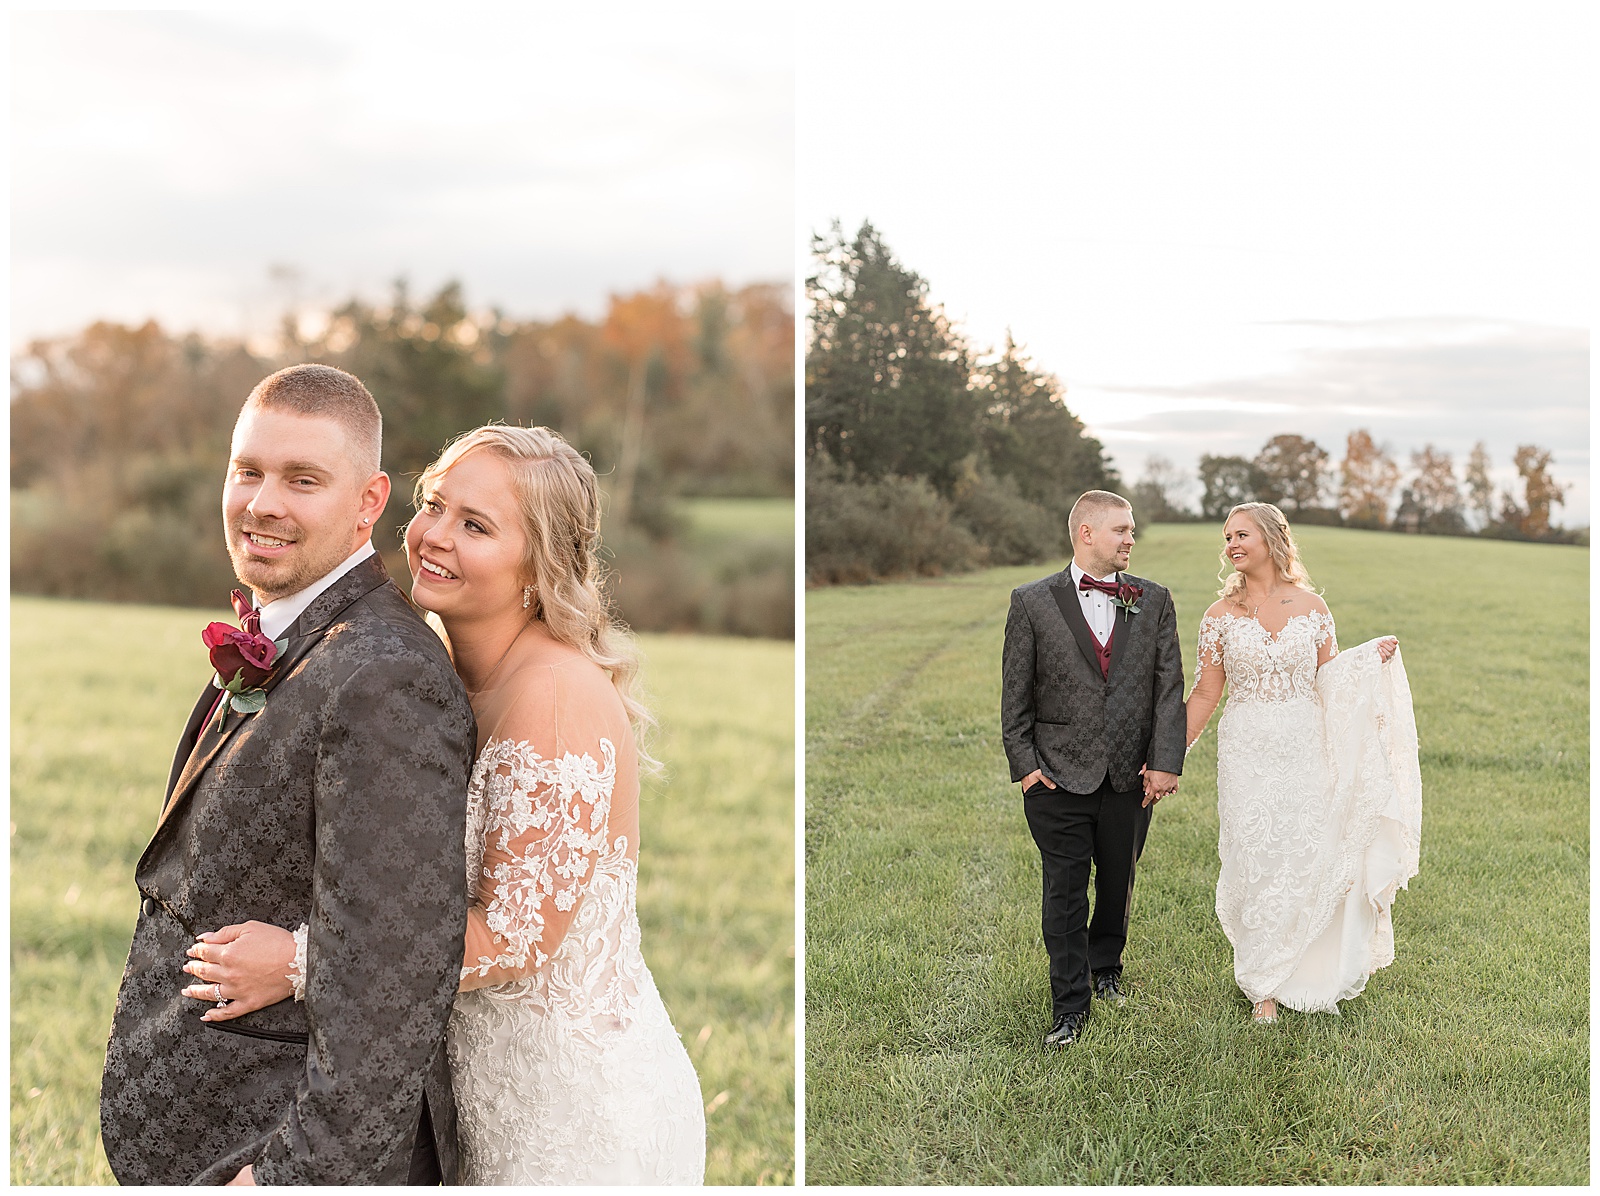 bride hugging her groom from behind as they both smile and he looks at camera on fall day